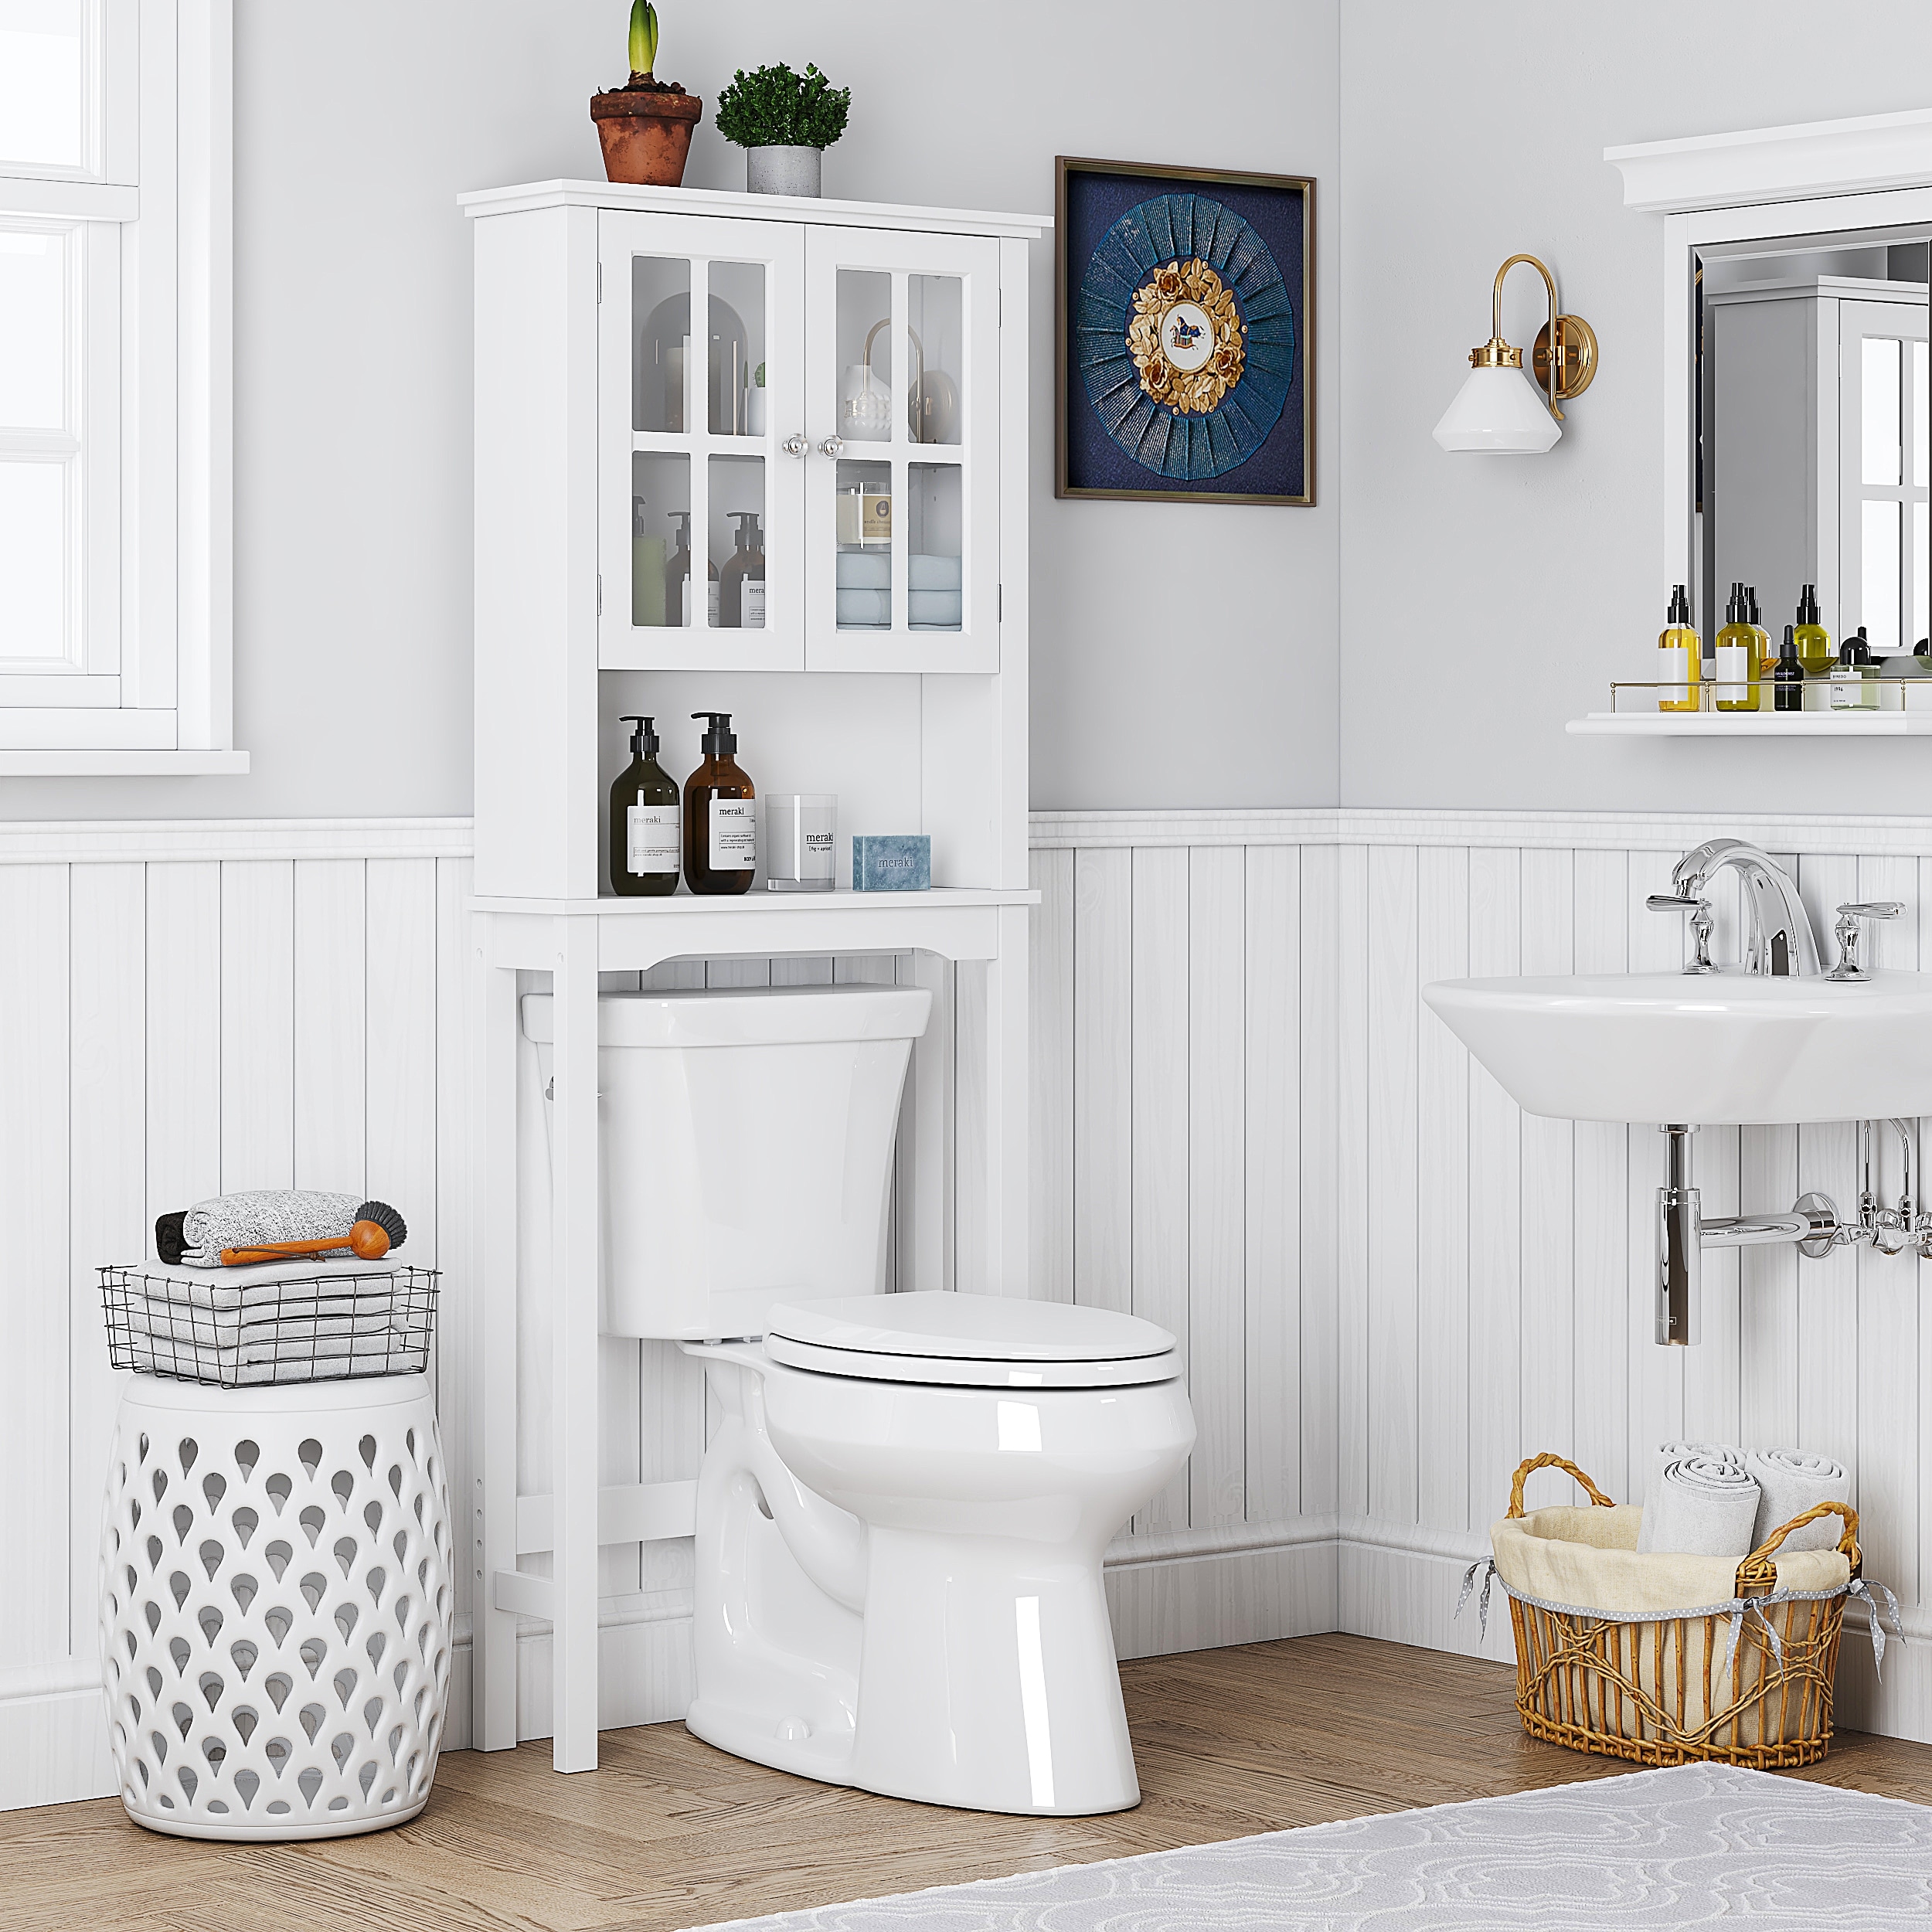 https://ak1.ostkcdn.com/images/products/is/images/direct/d010f74ca0503e91579548ca3db4ae48da5d8415/Spirich-Home-Over-The-Toilet-Storage-Cabinet%2C-Bathroom-Shelf-Over-Toilet%2C-Bathroom-Space-Saver-Cabinet-with-Glass-Doors%2C-White.jpg